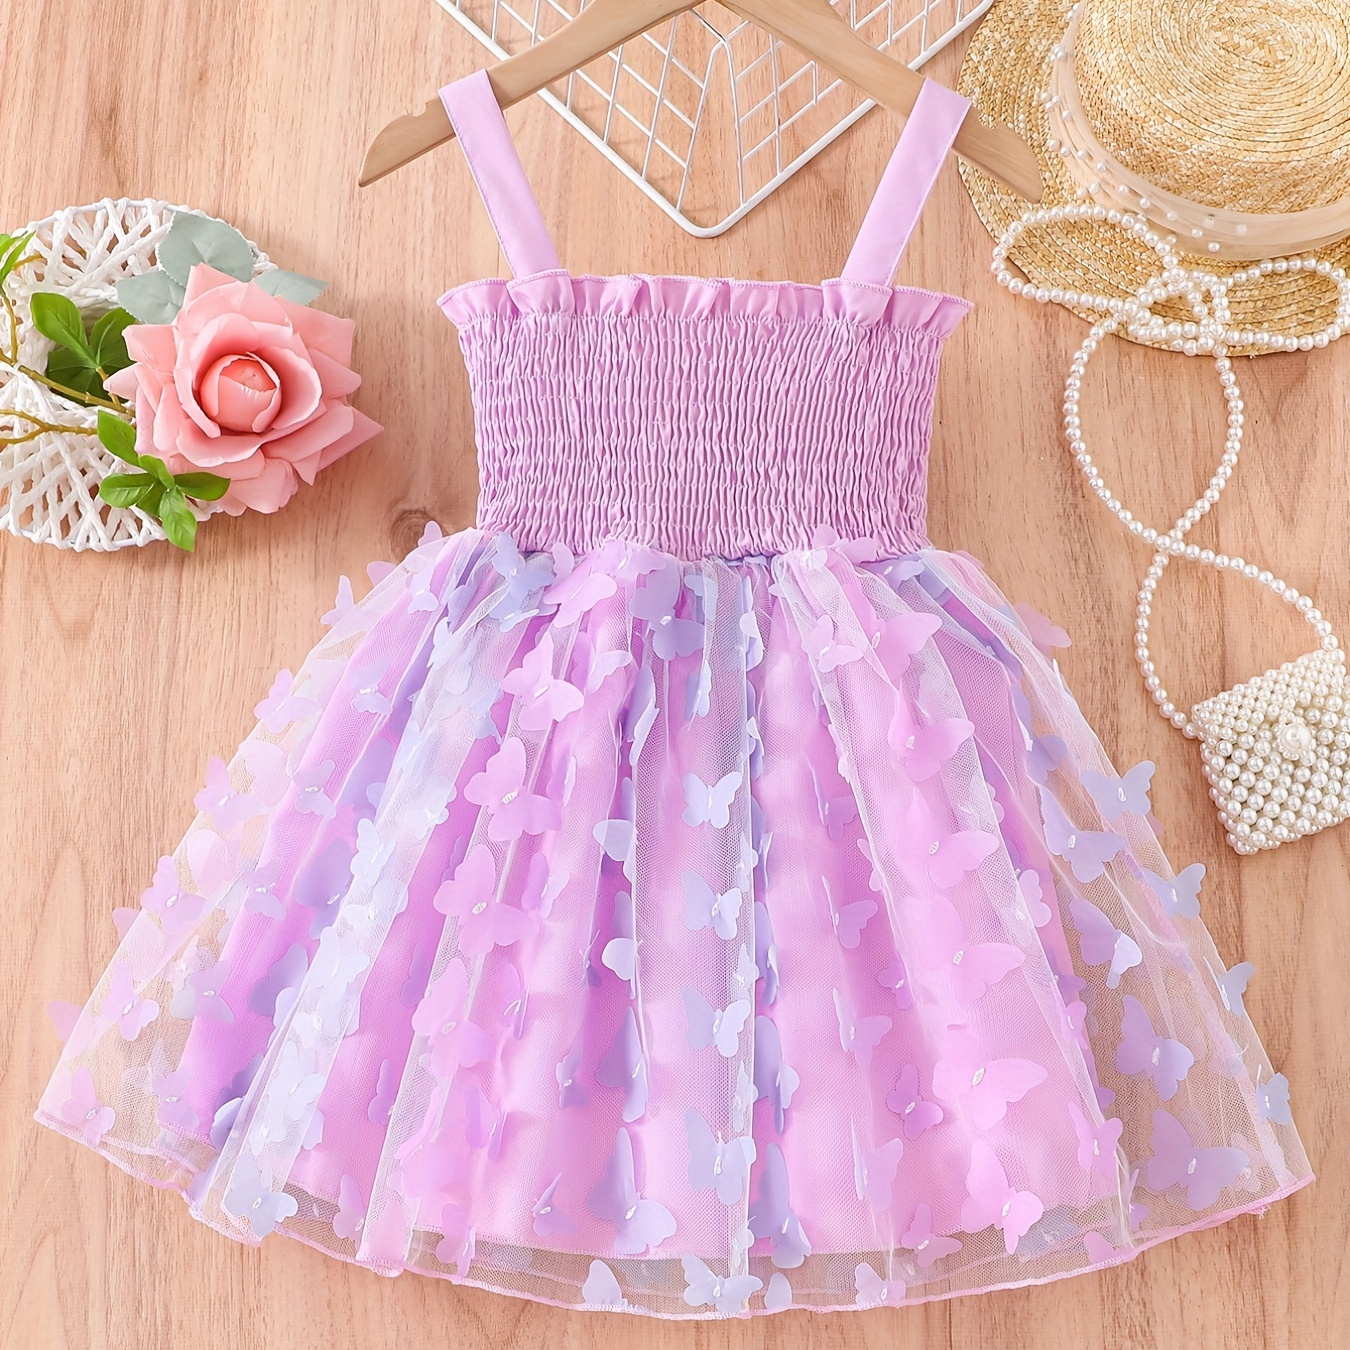 

Toddler Girls Butterfly Applique Frill Trim Shirred Cami Princess Dress For Party Beach Vacation Kids Summer Clothes